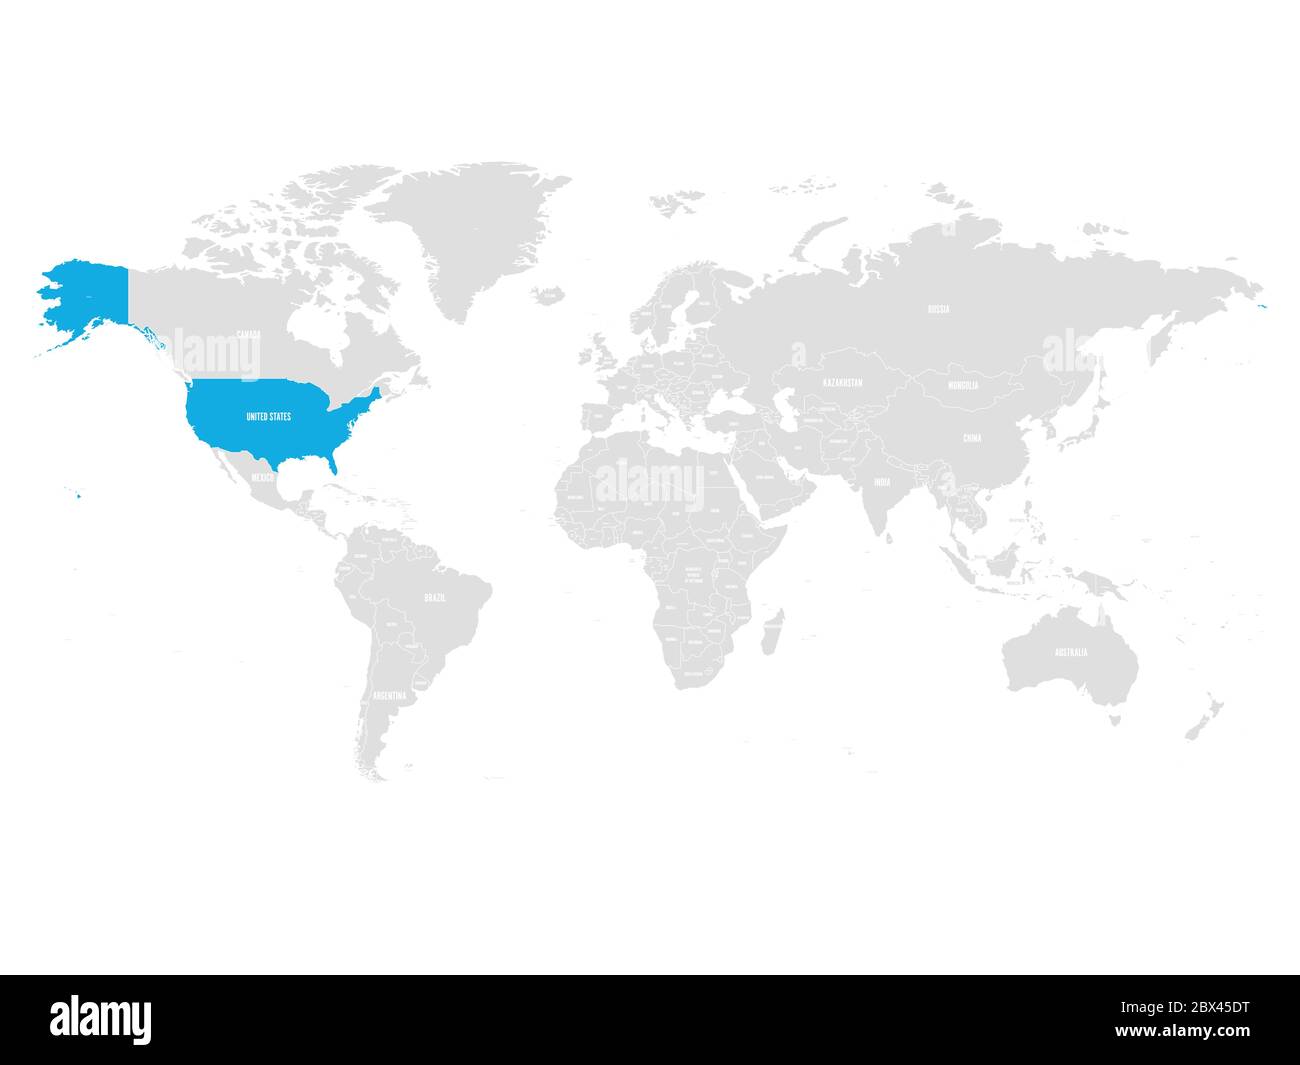 United States of America marked by blue in grey World political ...